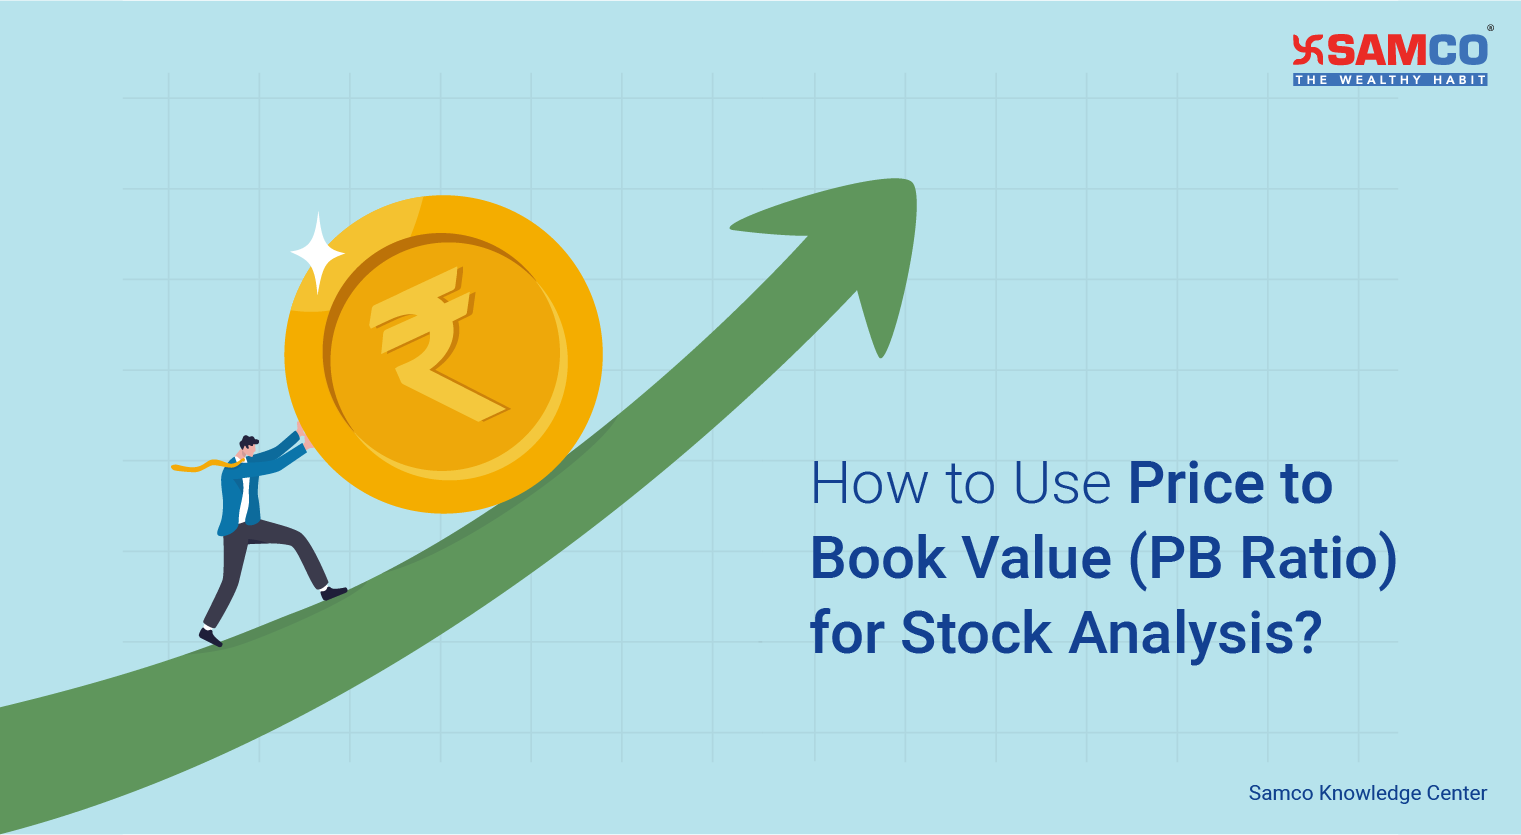 How to Use Price to Book Value (PB Ratio) for Stock Analysis?